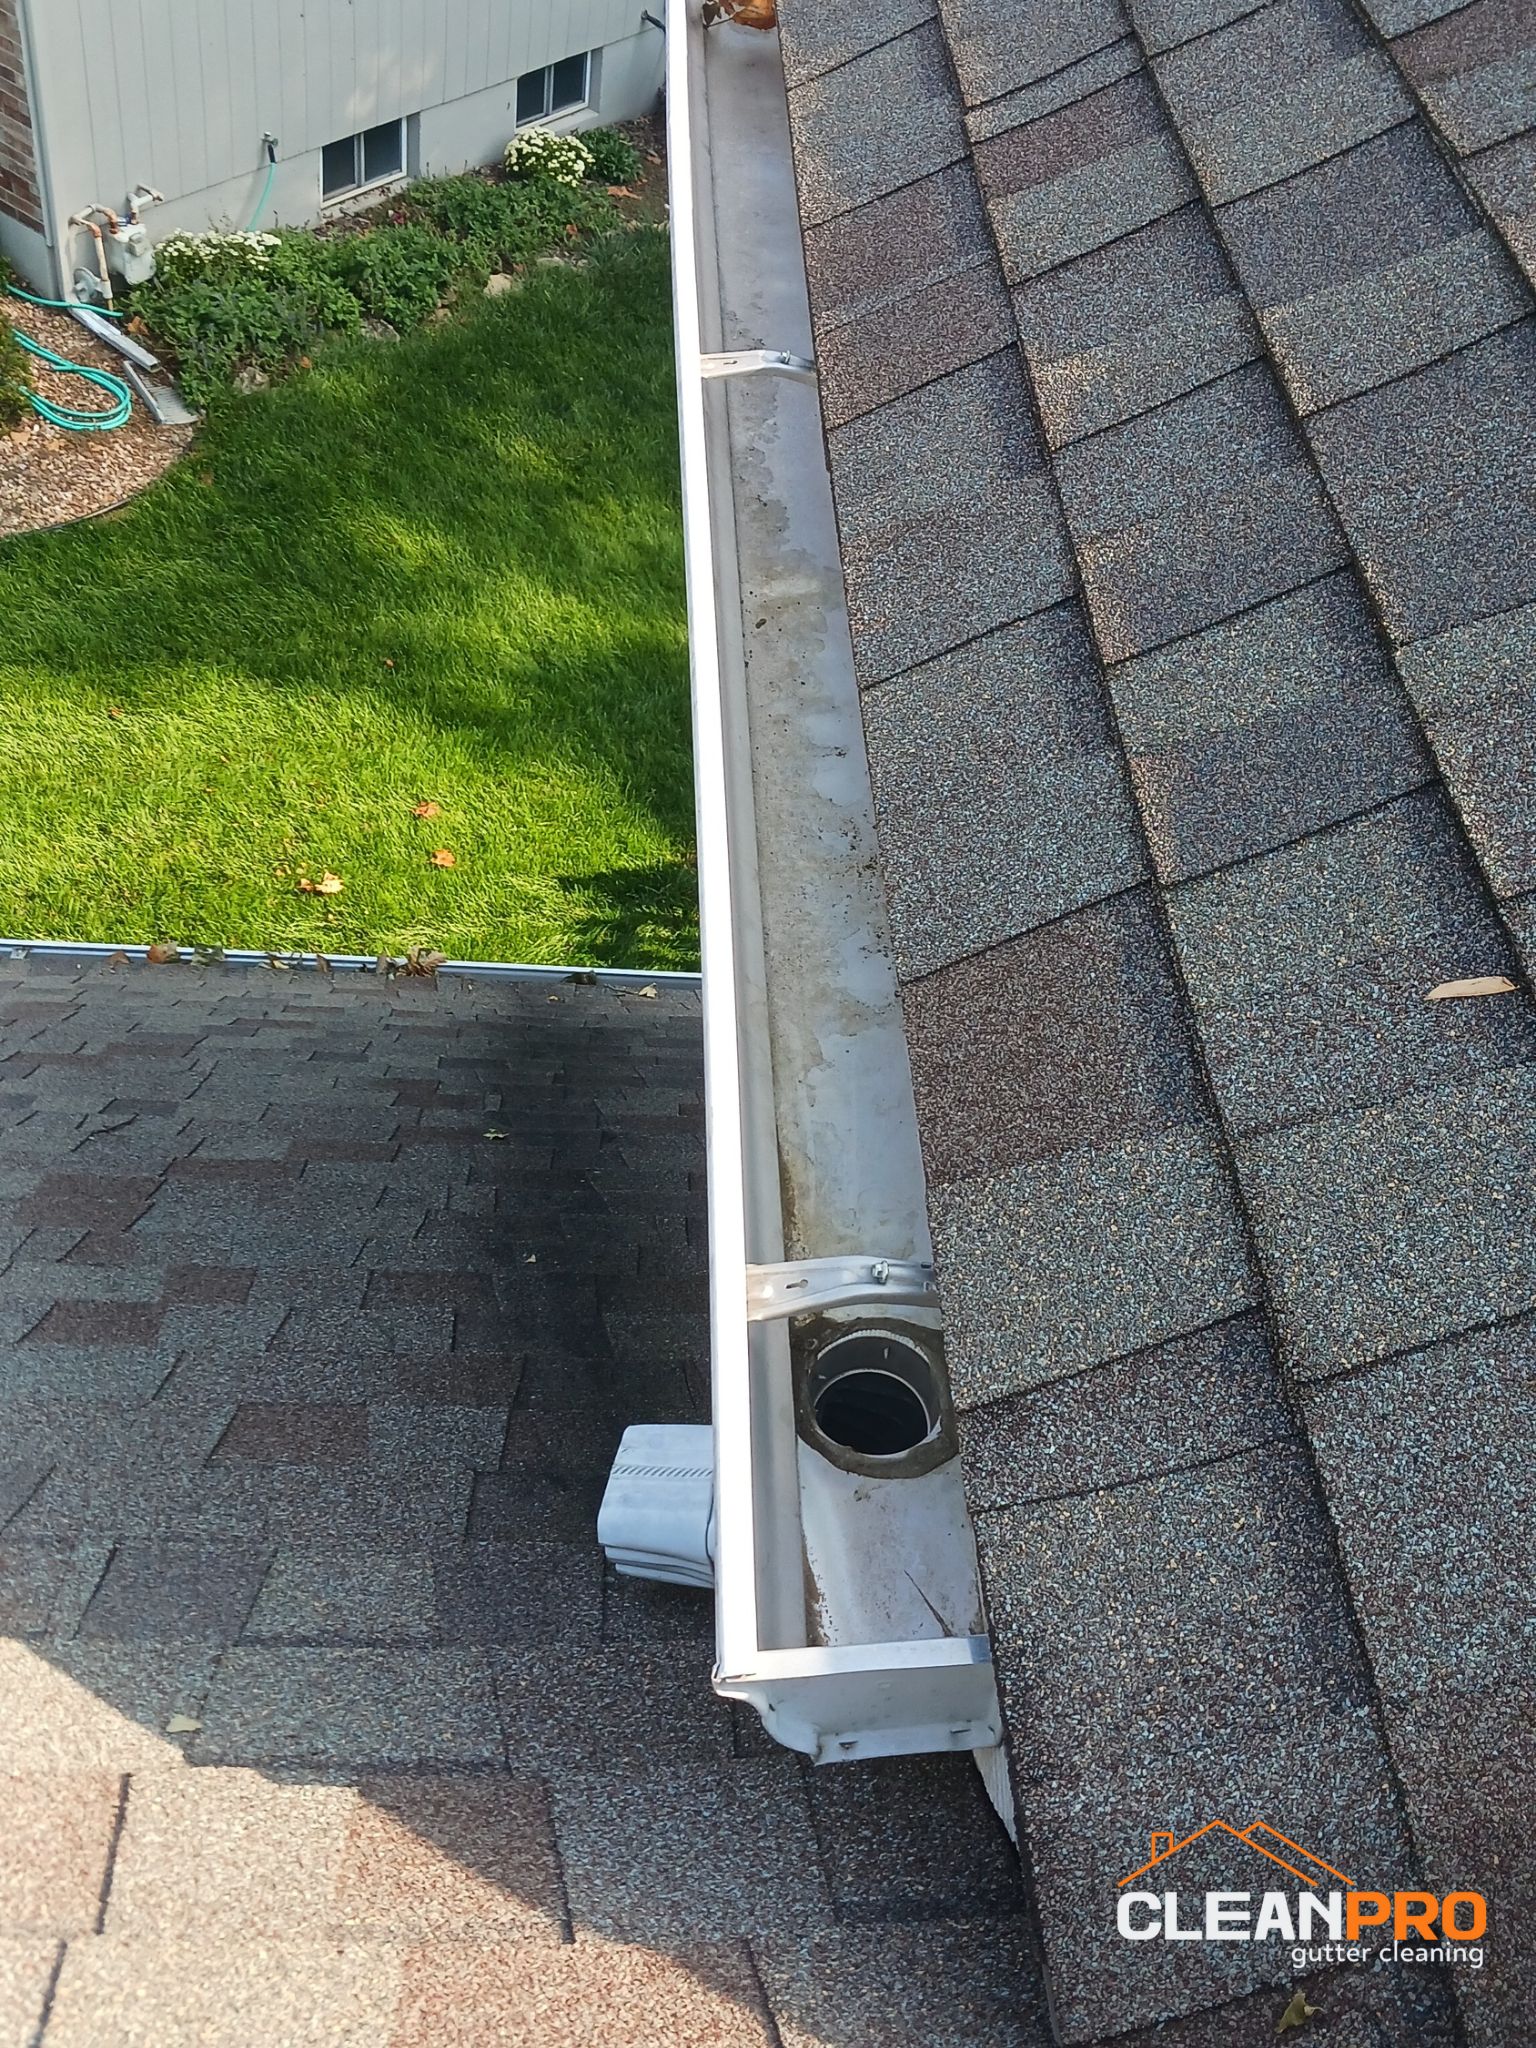 Quality Gutter Cleaning in Austin TX